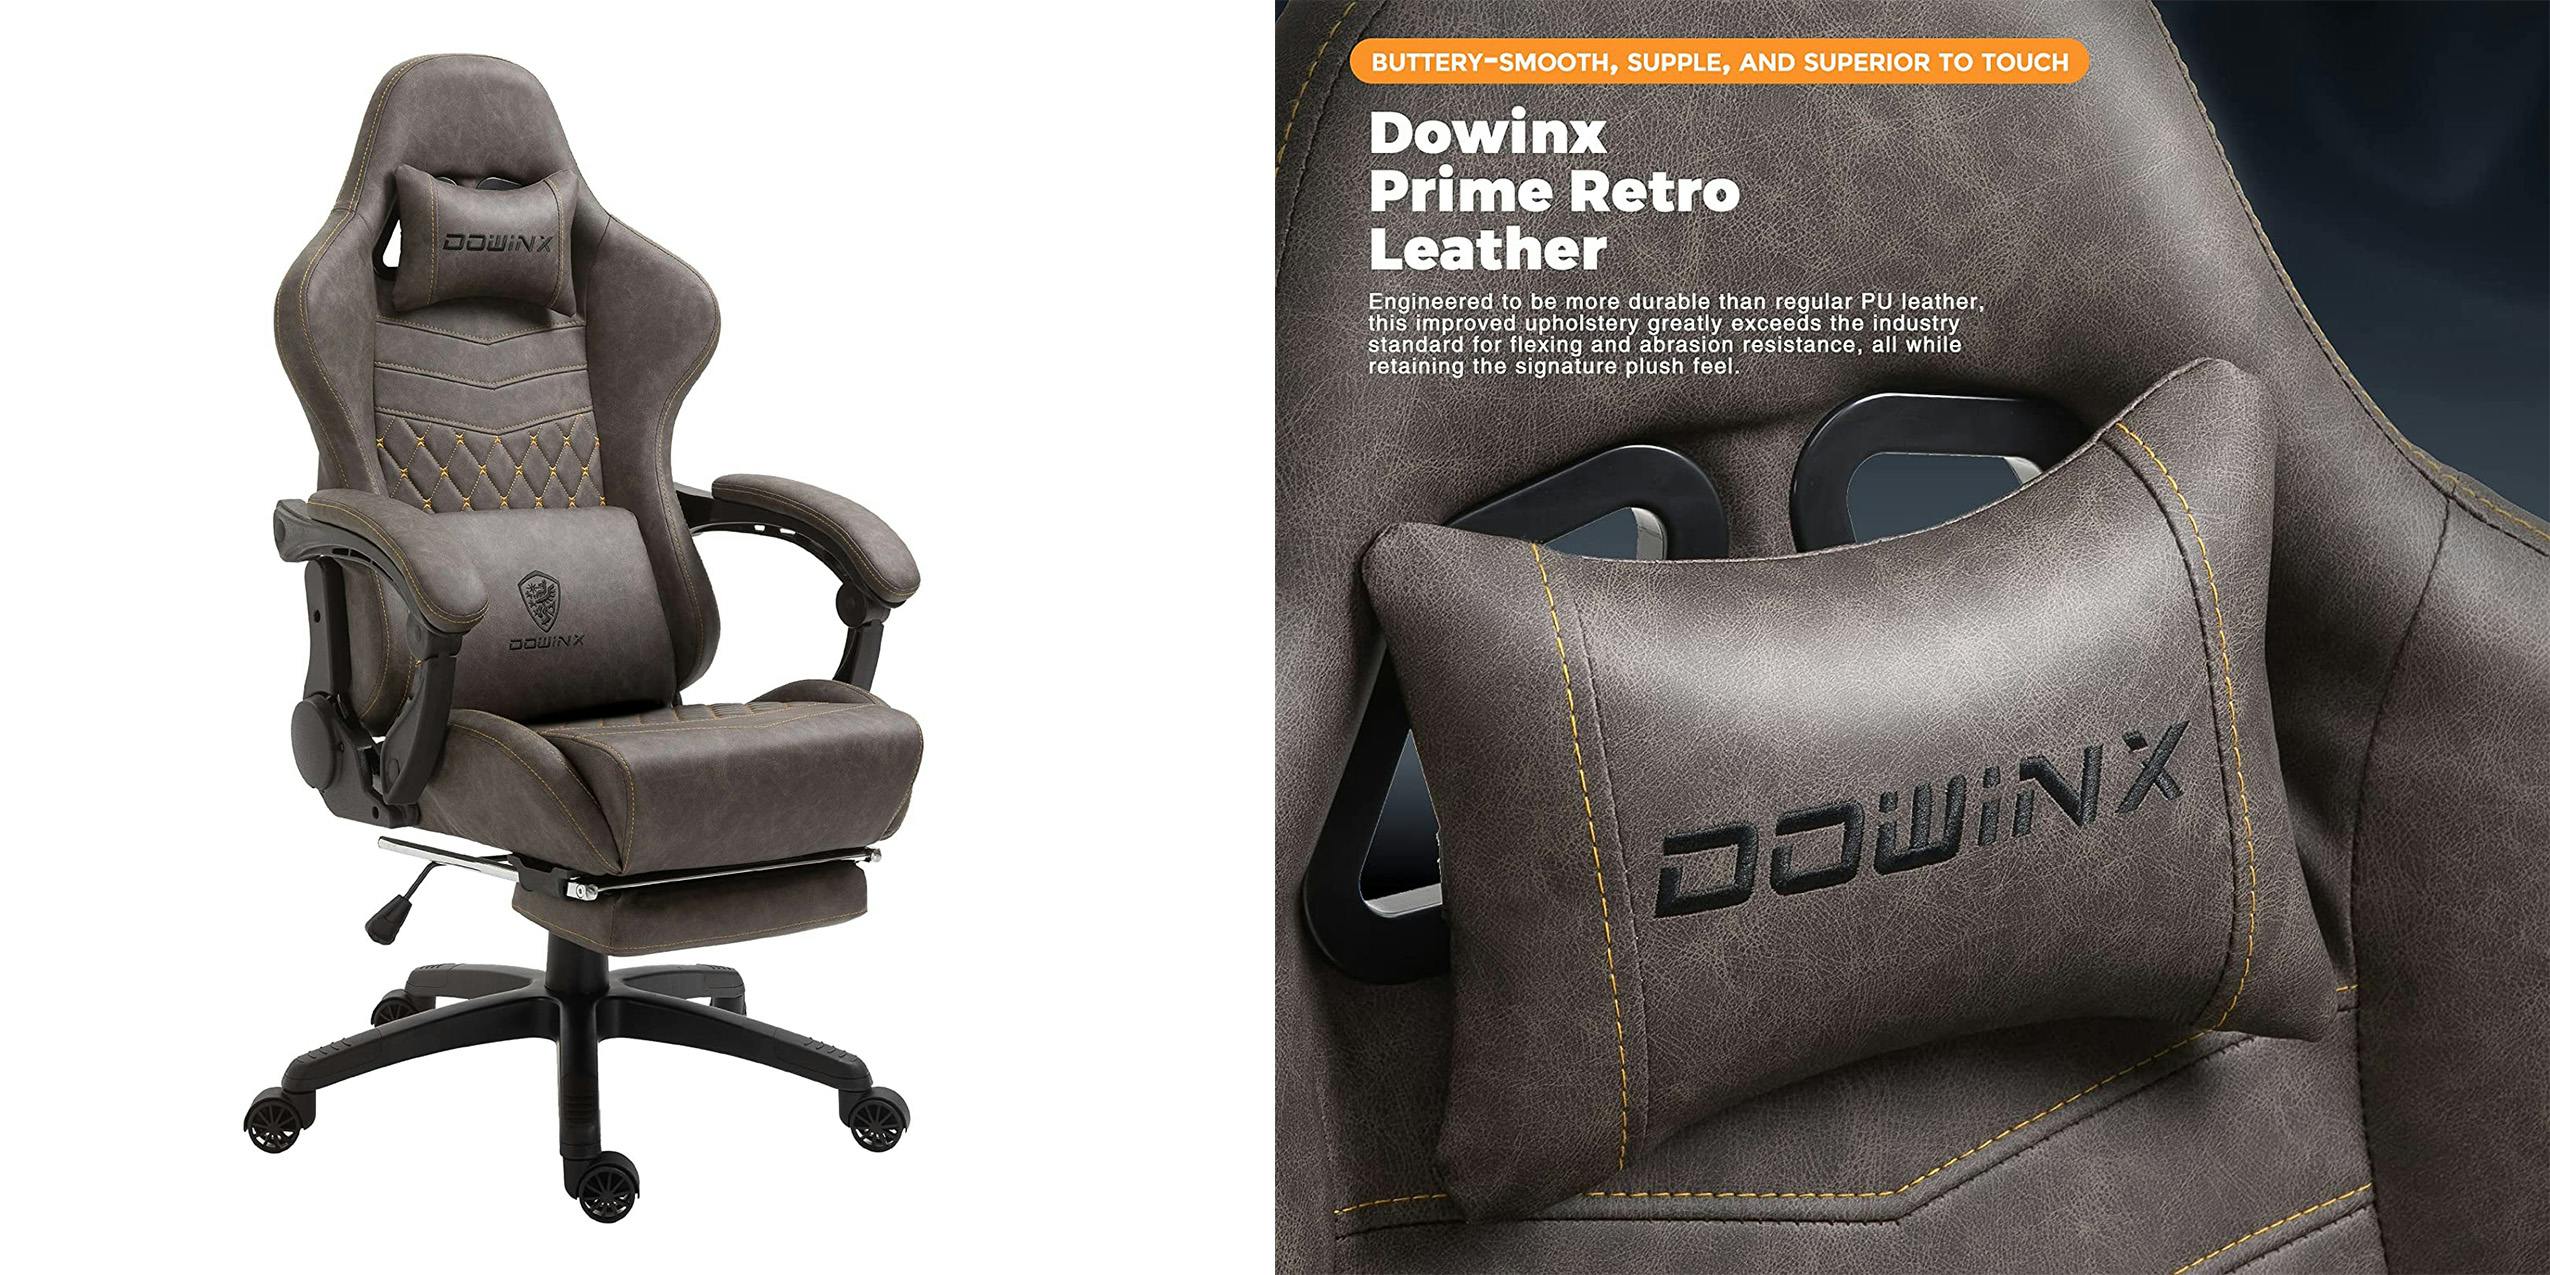 A Downix Gaming Chair product image.